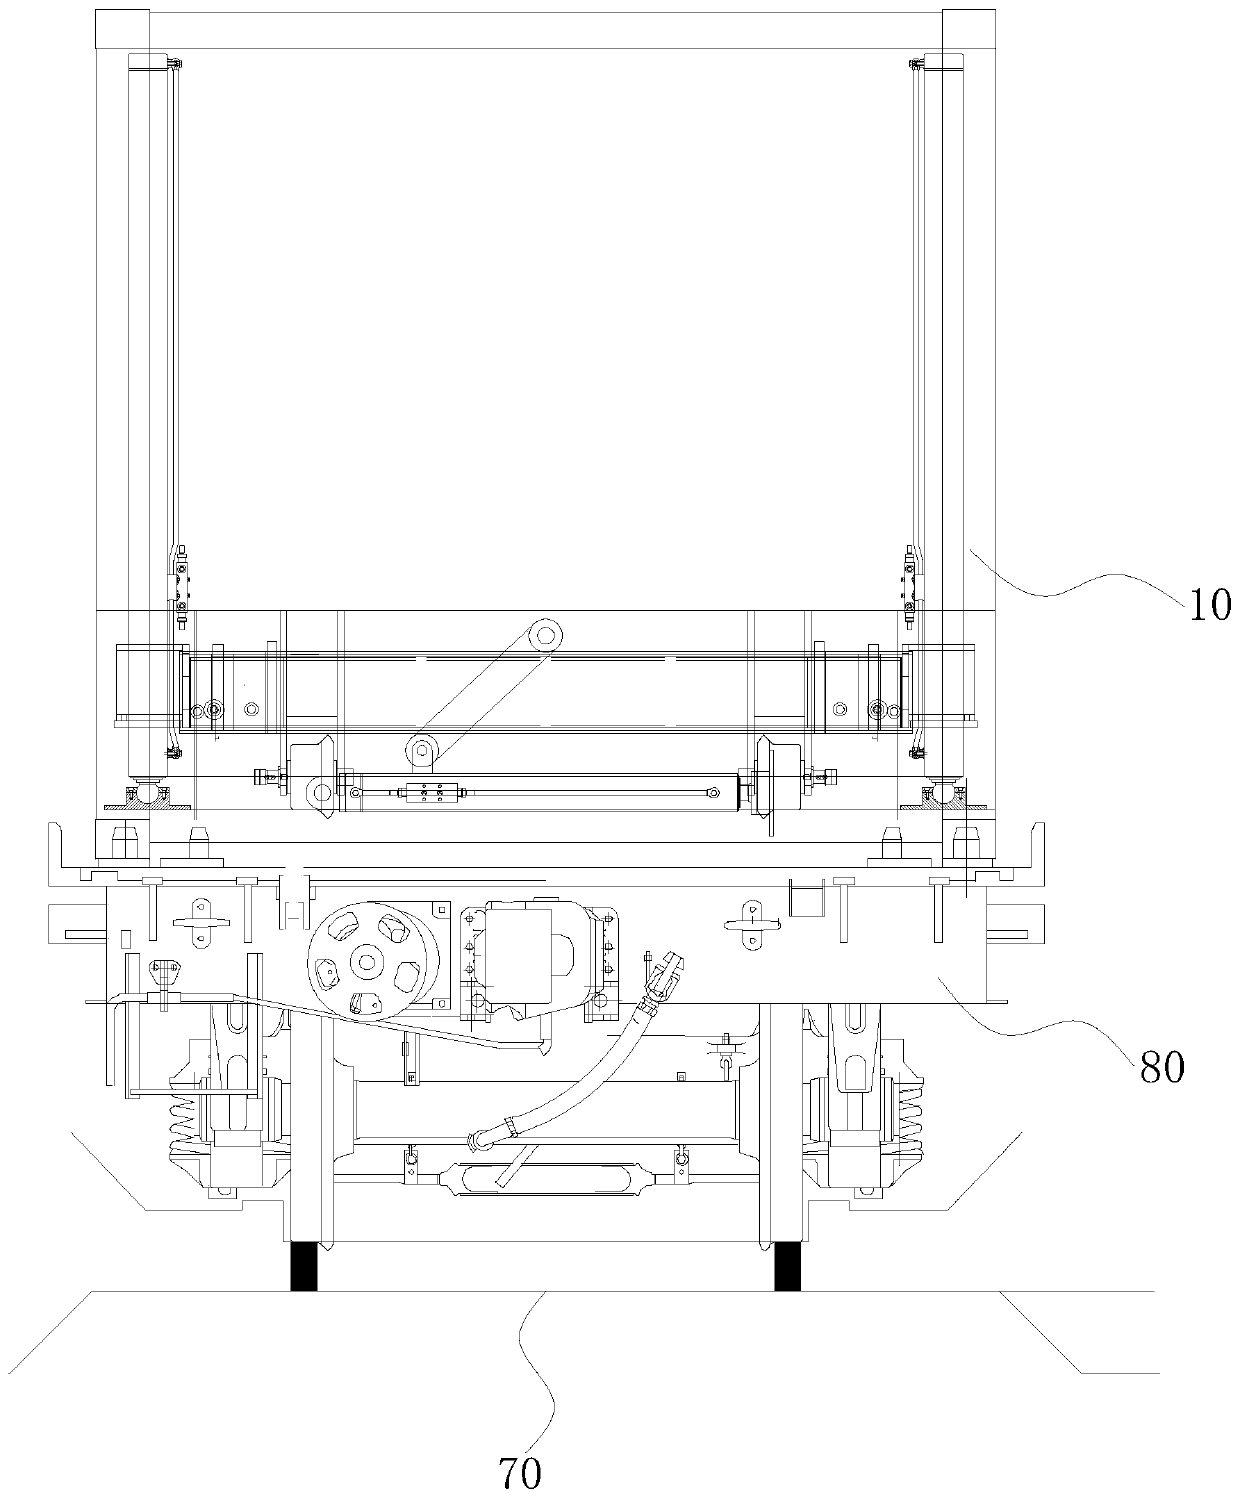 Railway self-loading and unloading multifunctional support equipment and system